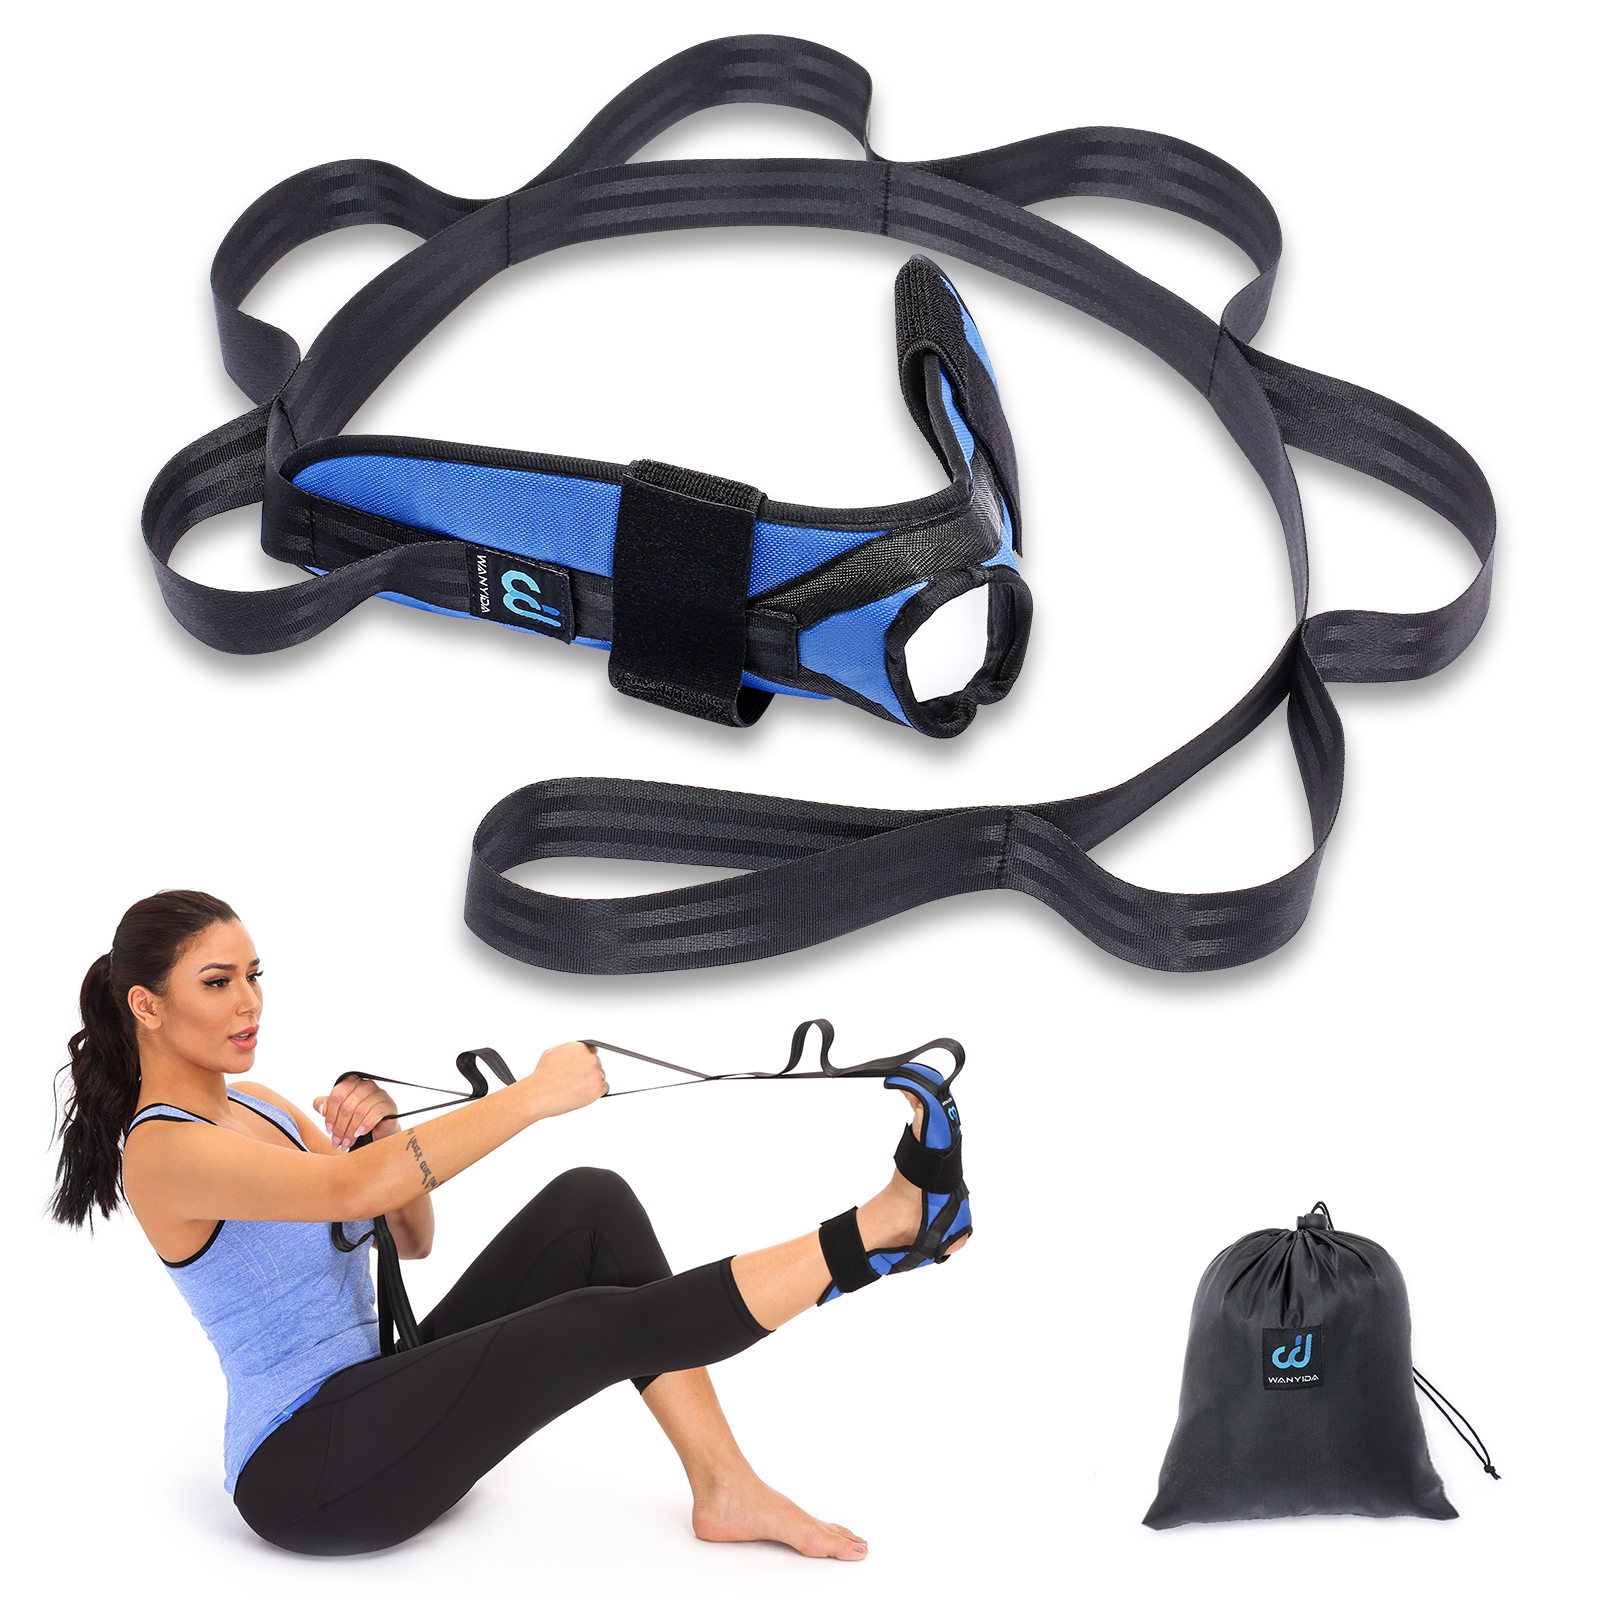  Foot Stretcher and Calf Stretcher for Plantar Fasciitis, Yoga  Stretching Strap, Leg Stretcher, Hamstring Stretcher, Stretching Strap for  Plantar Fasciitis, Drop Foot, Yoga and Pain Relief : Sports & Outdoors